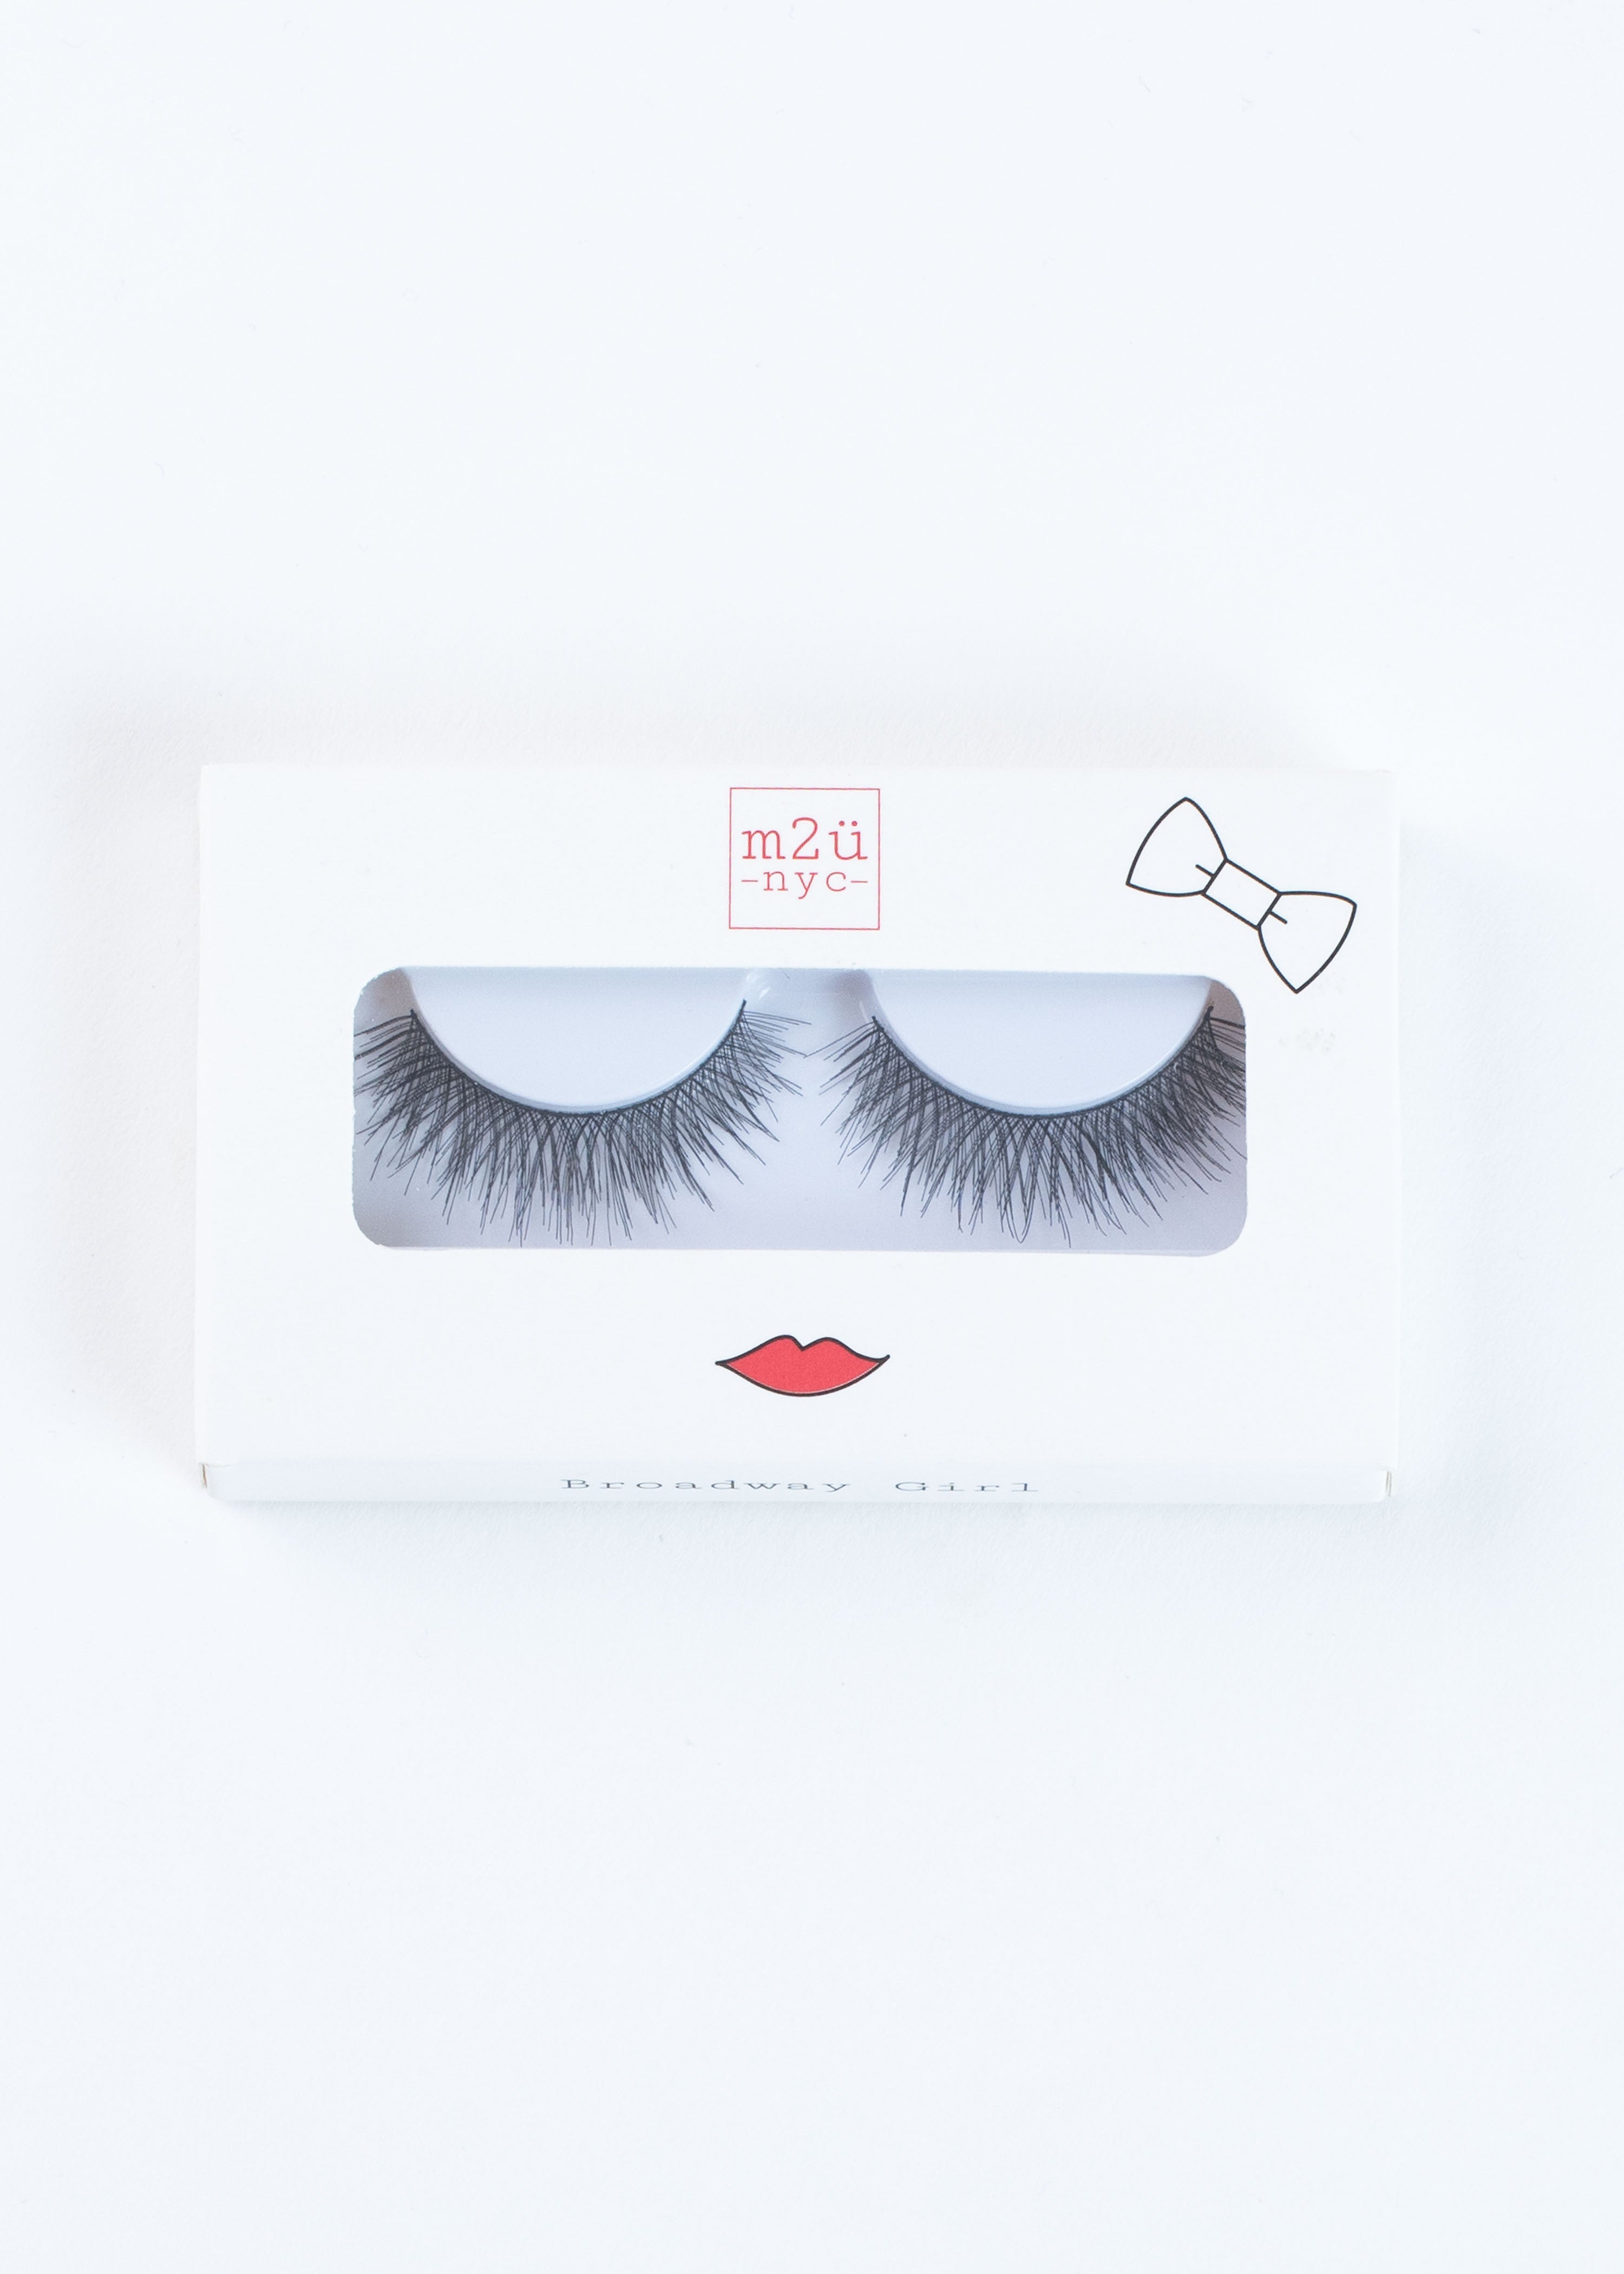 a pair of dramatic volume style false eyelashes in a white box with red lips